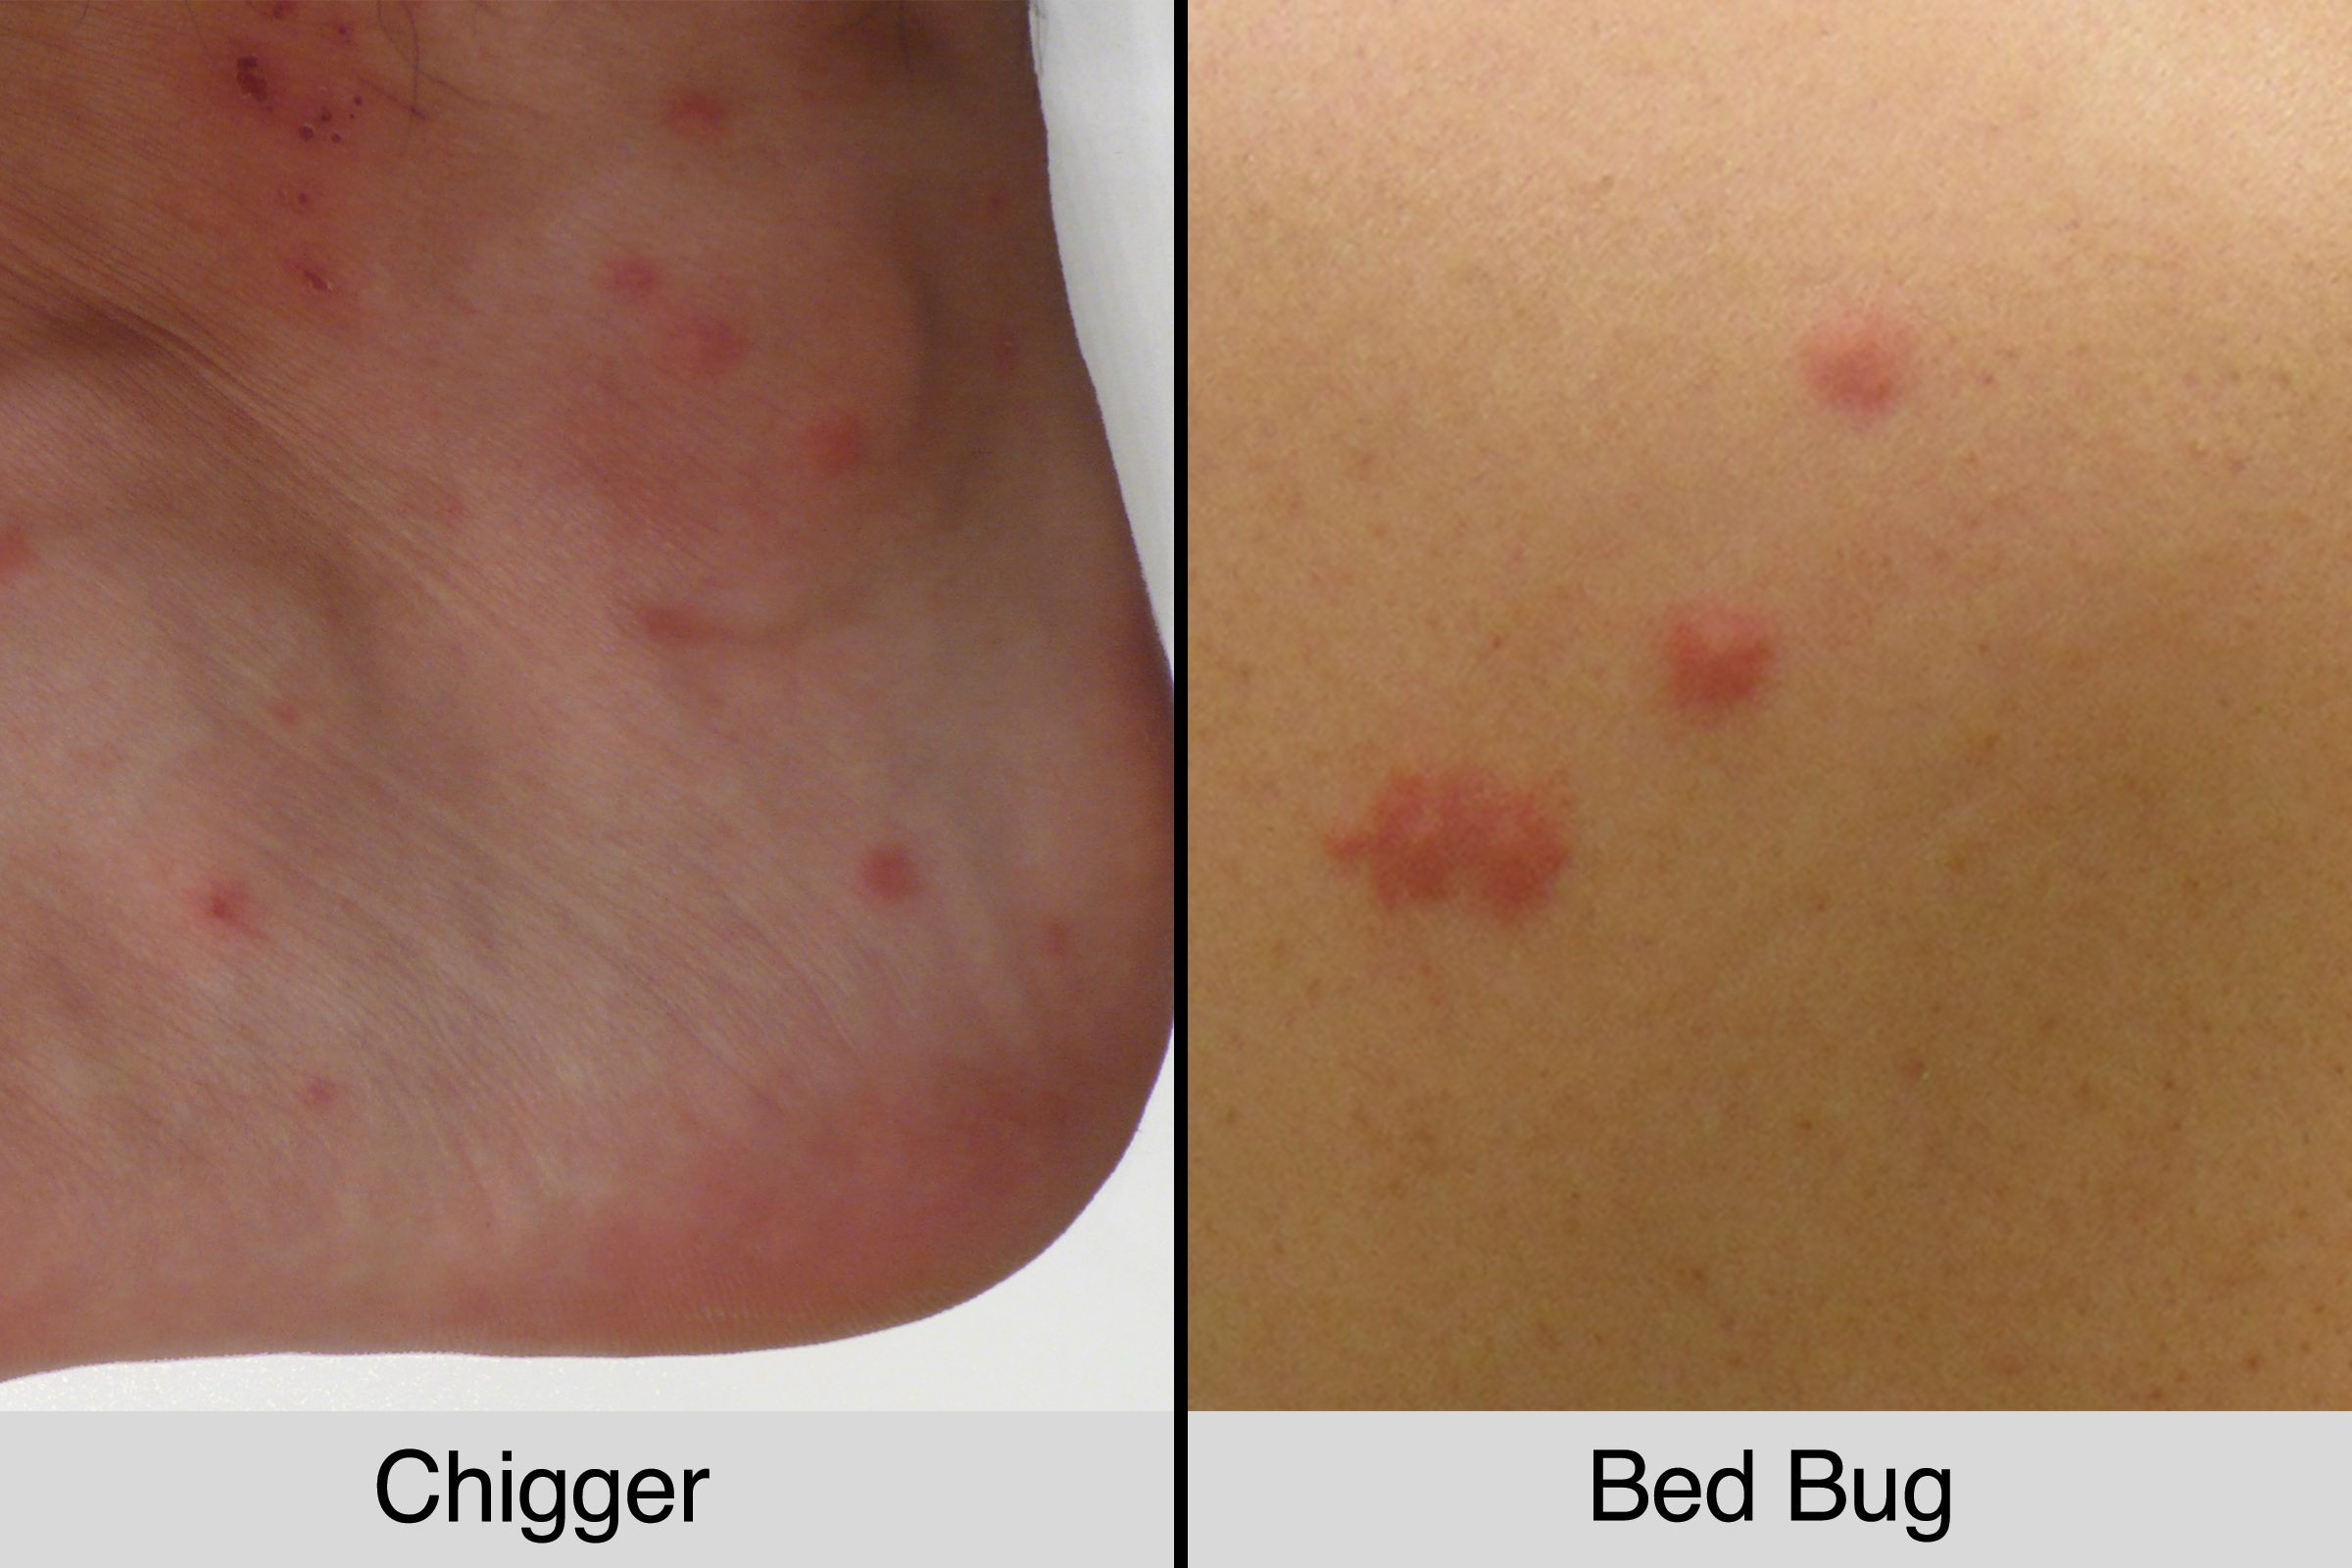 Chigger Bites Vs Bed Bug Bites How To Tell The Difference The Healthy